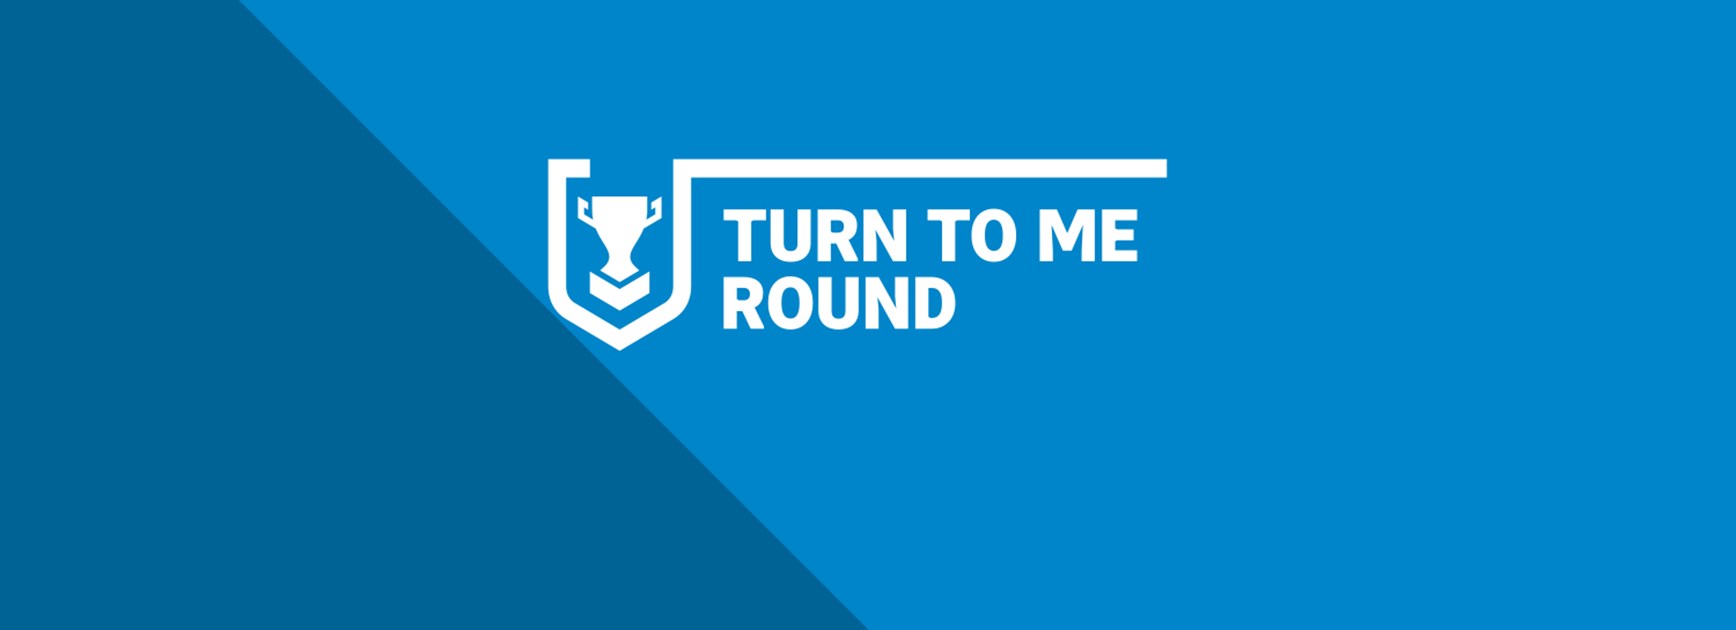 Hostplus Cup Round 20 Turn to Me Round team lists